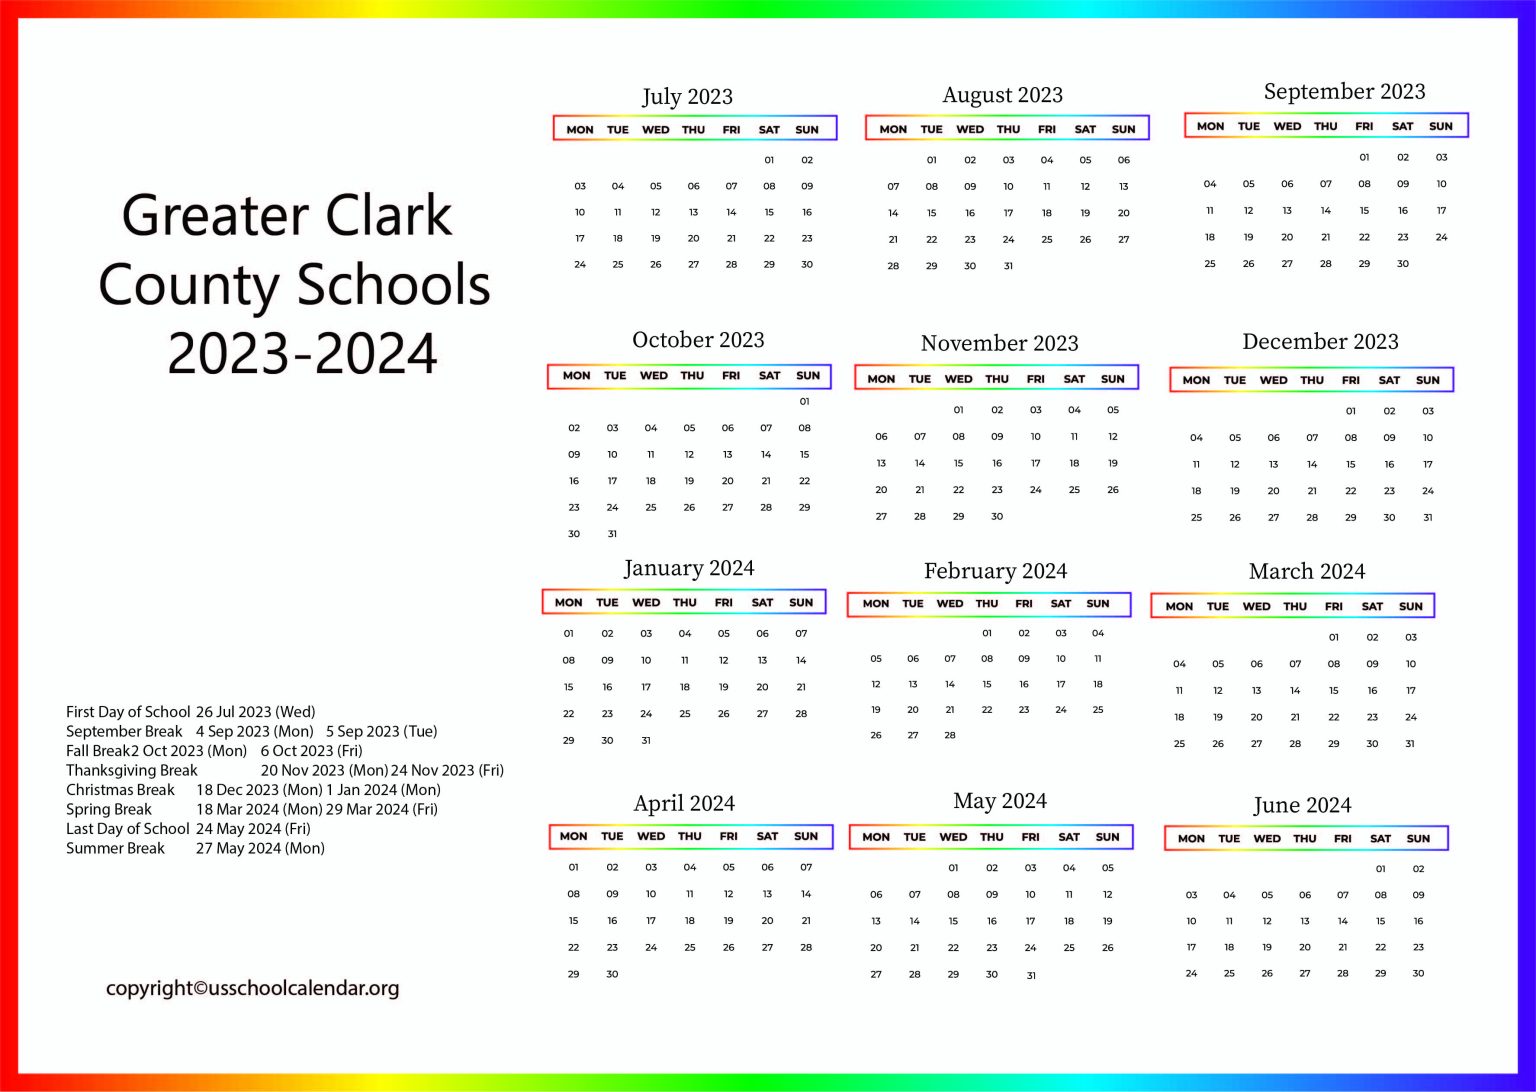 Greater Clark County Schools Calendar With Holidays 2023 2024